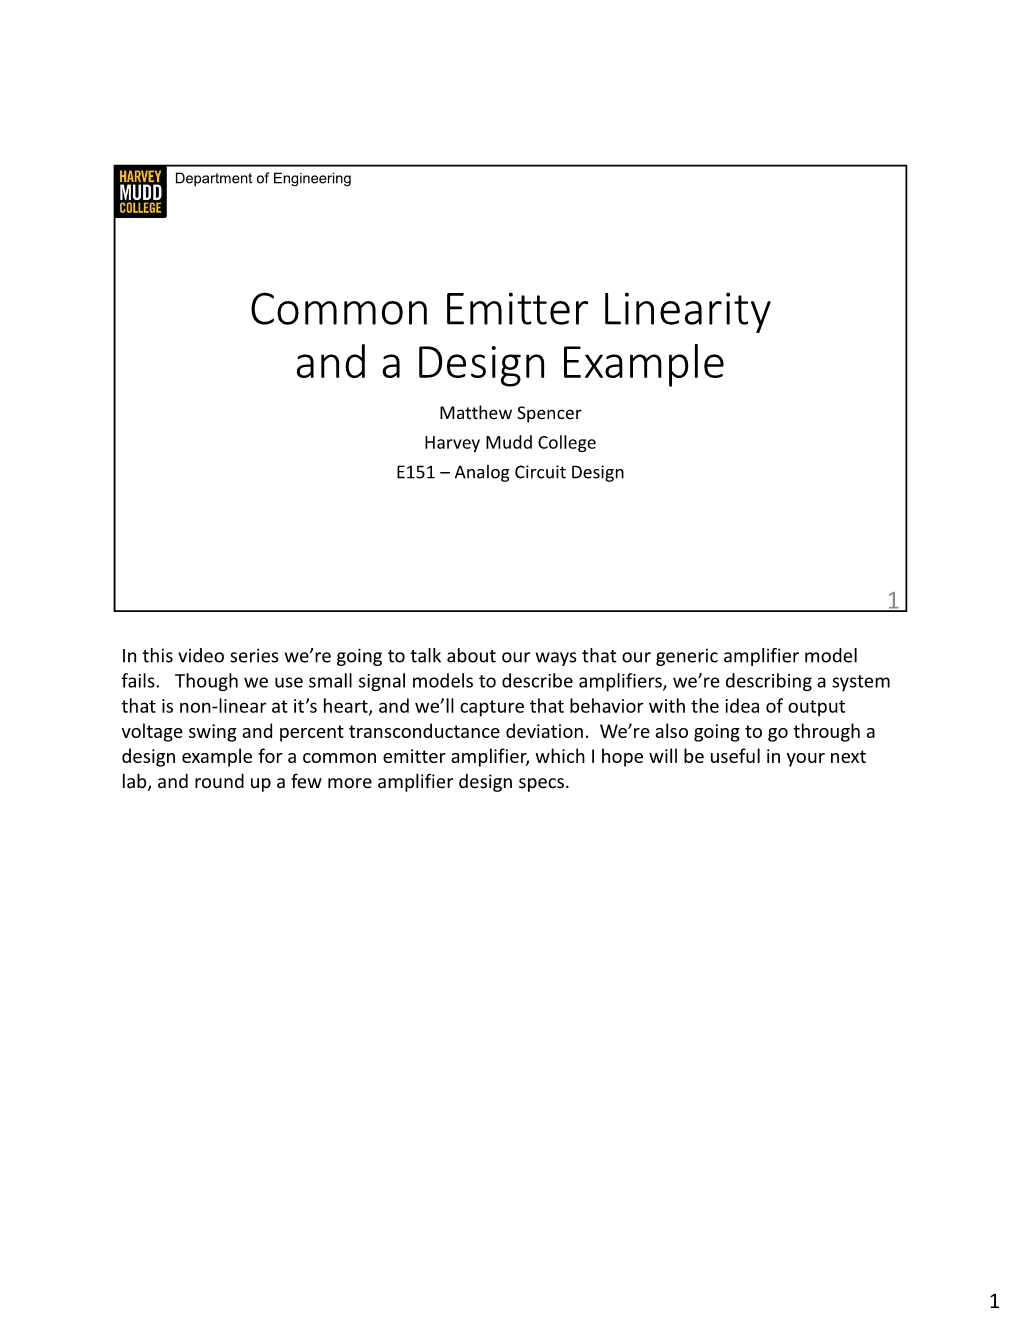 Common Emitter Linearity and a Design Example Matthew Spencer Harvey Mudd College E151 – Analog Circuit Design